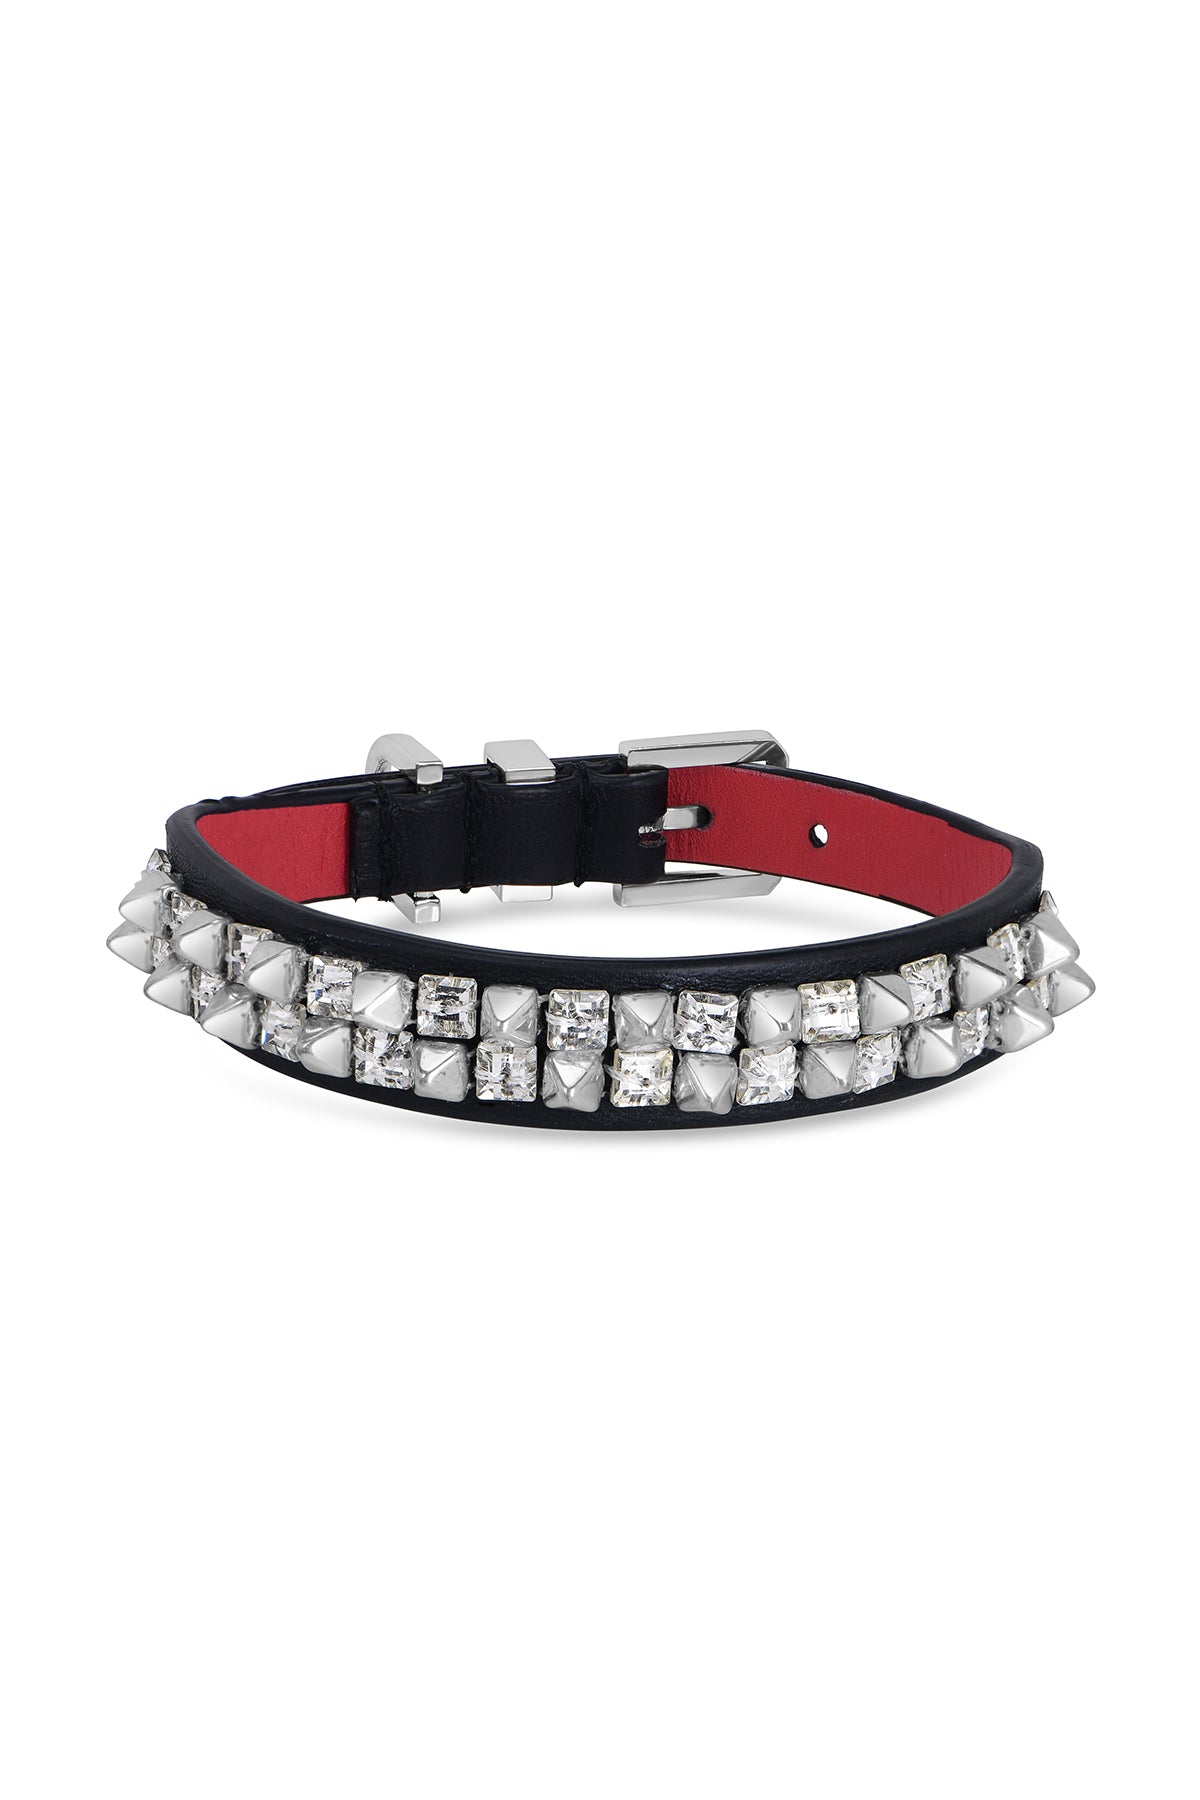 BOOTZY COUTURE | AVENUE OF THE STARS COLLAR